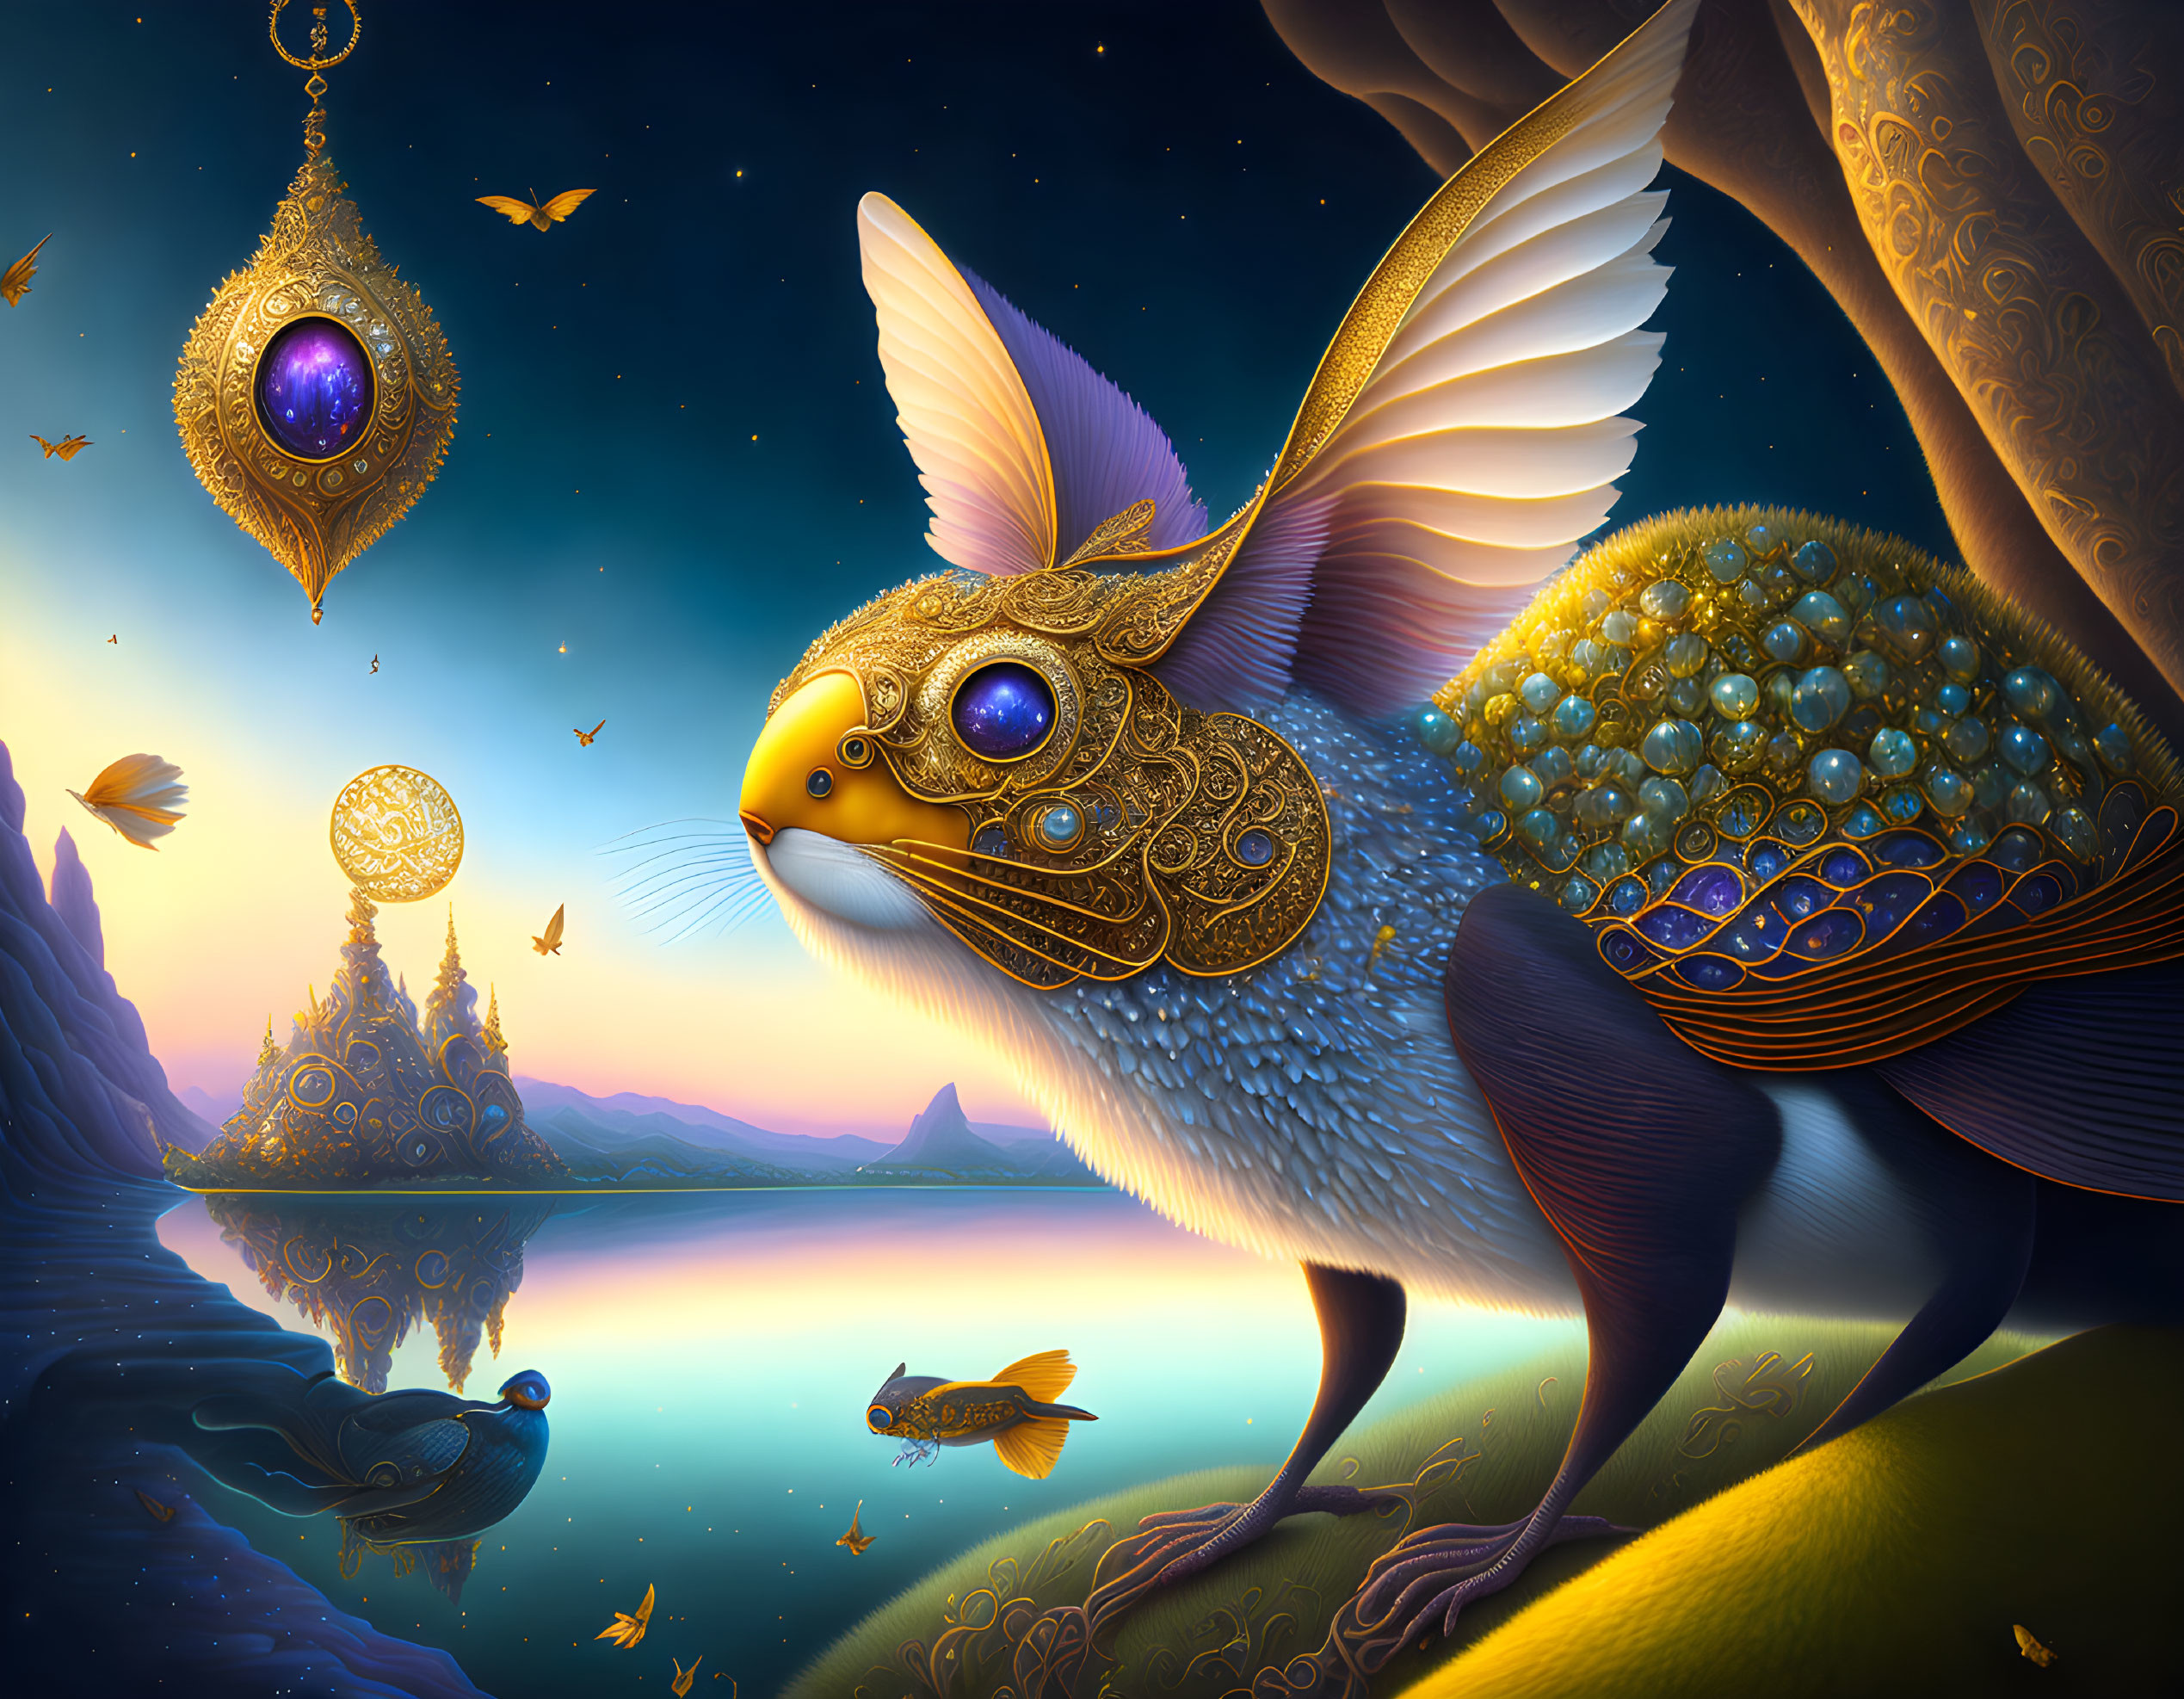 Fantastical rabbit with gold and gem embellishments by reflective lake